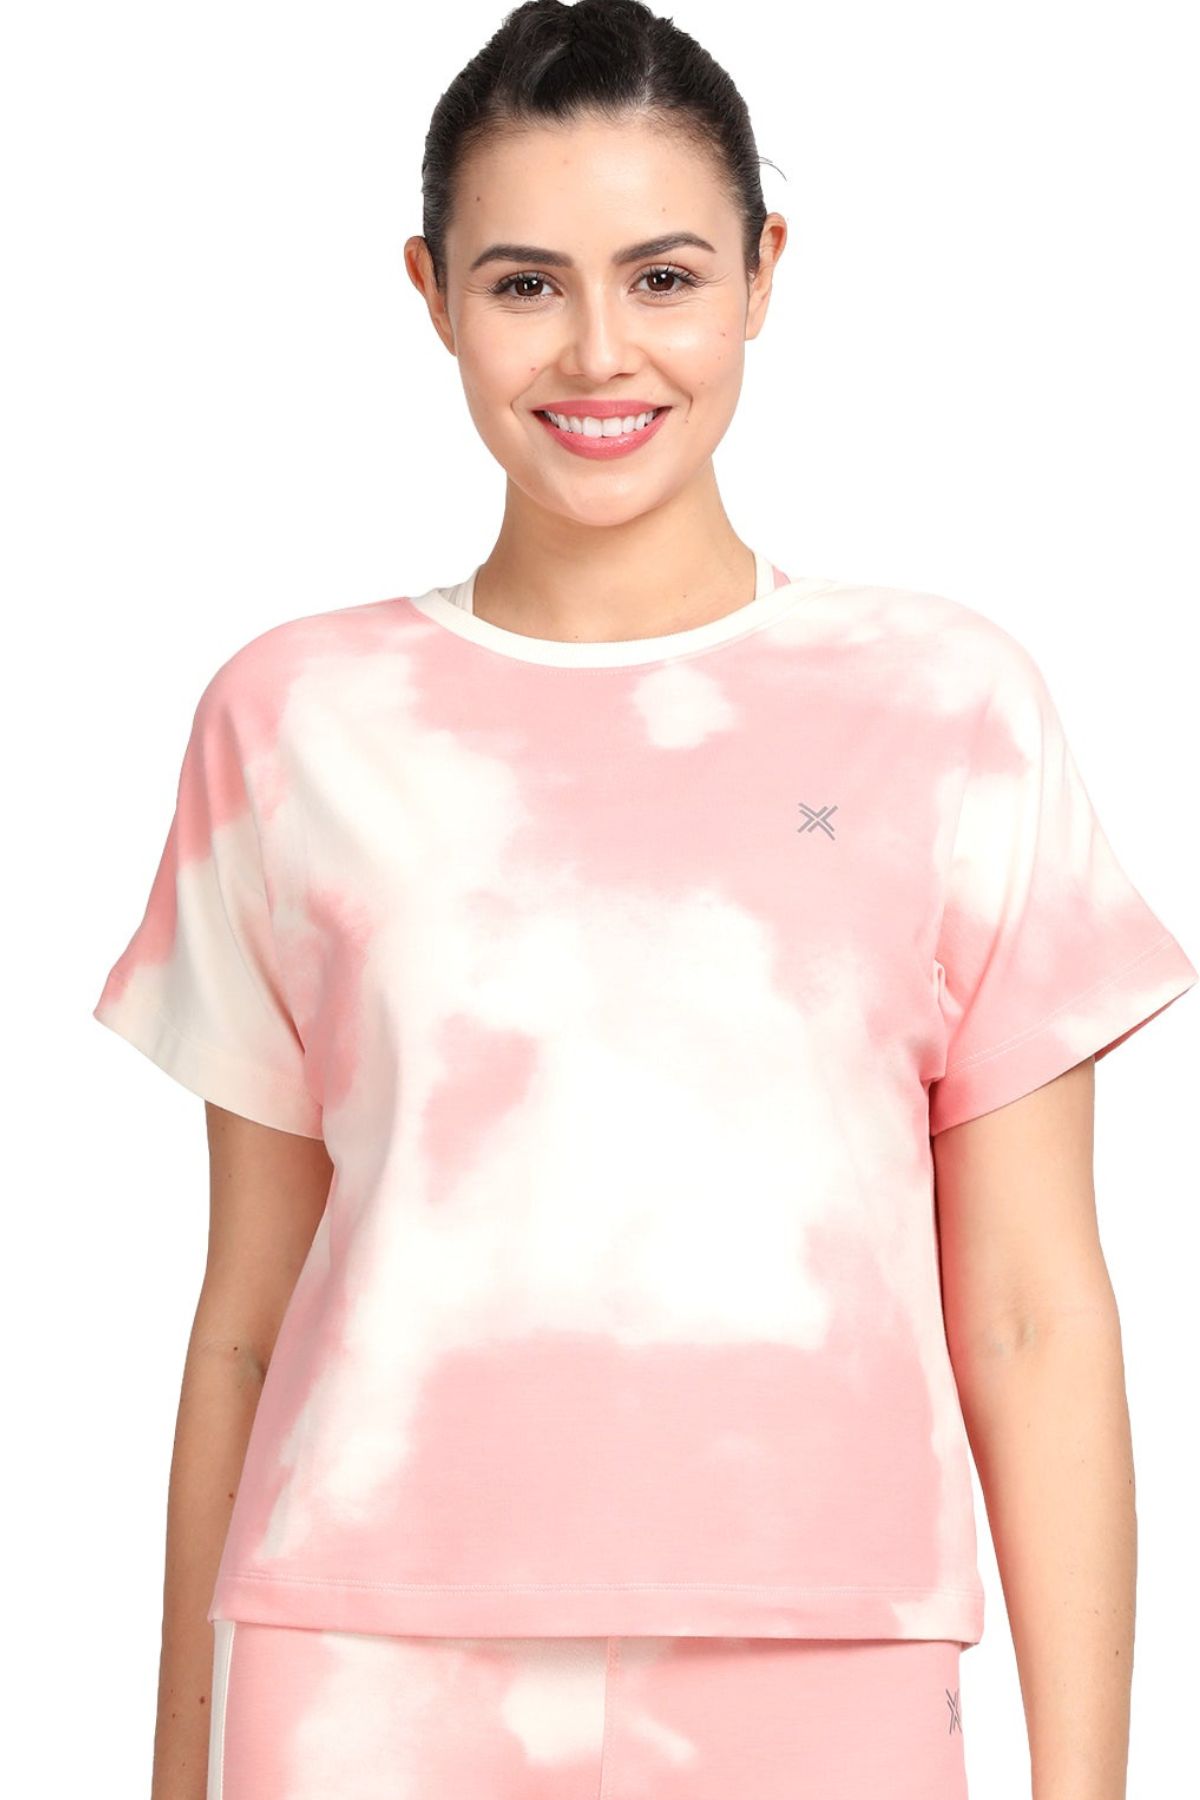 Dusty Pink Bamboo & Organic Cotton Cloudy Co-Ords Women